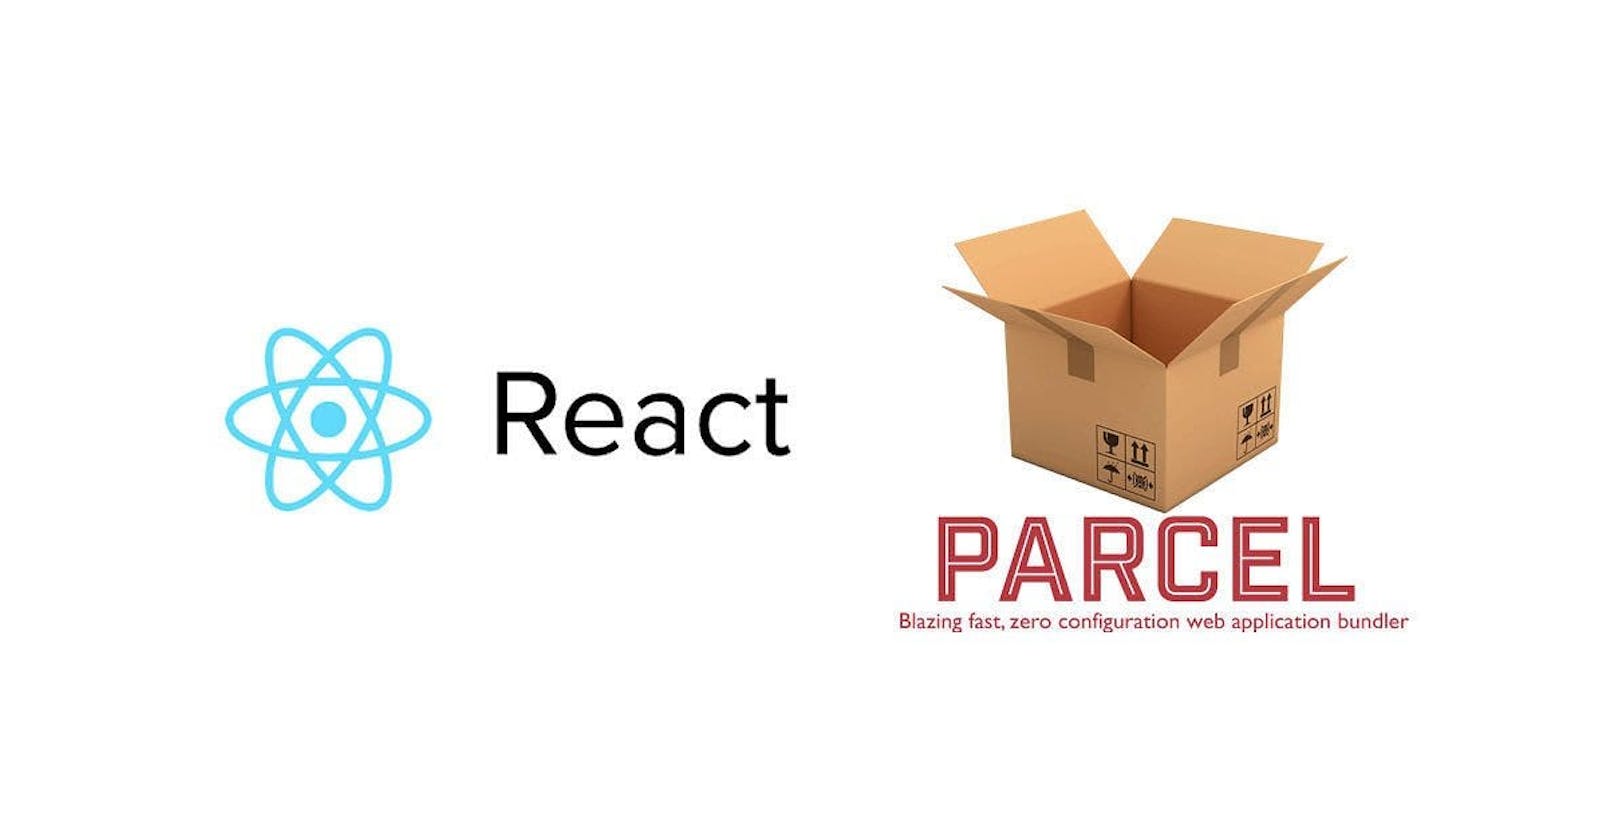 Igniting ⚡️ our React App with Parcel